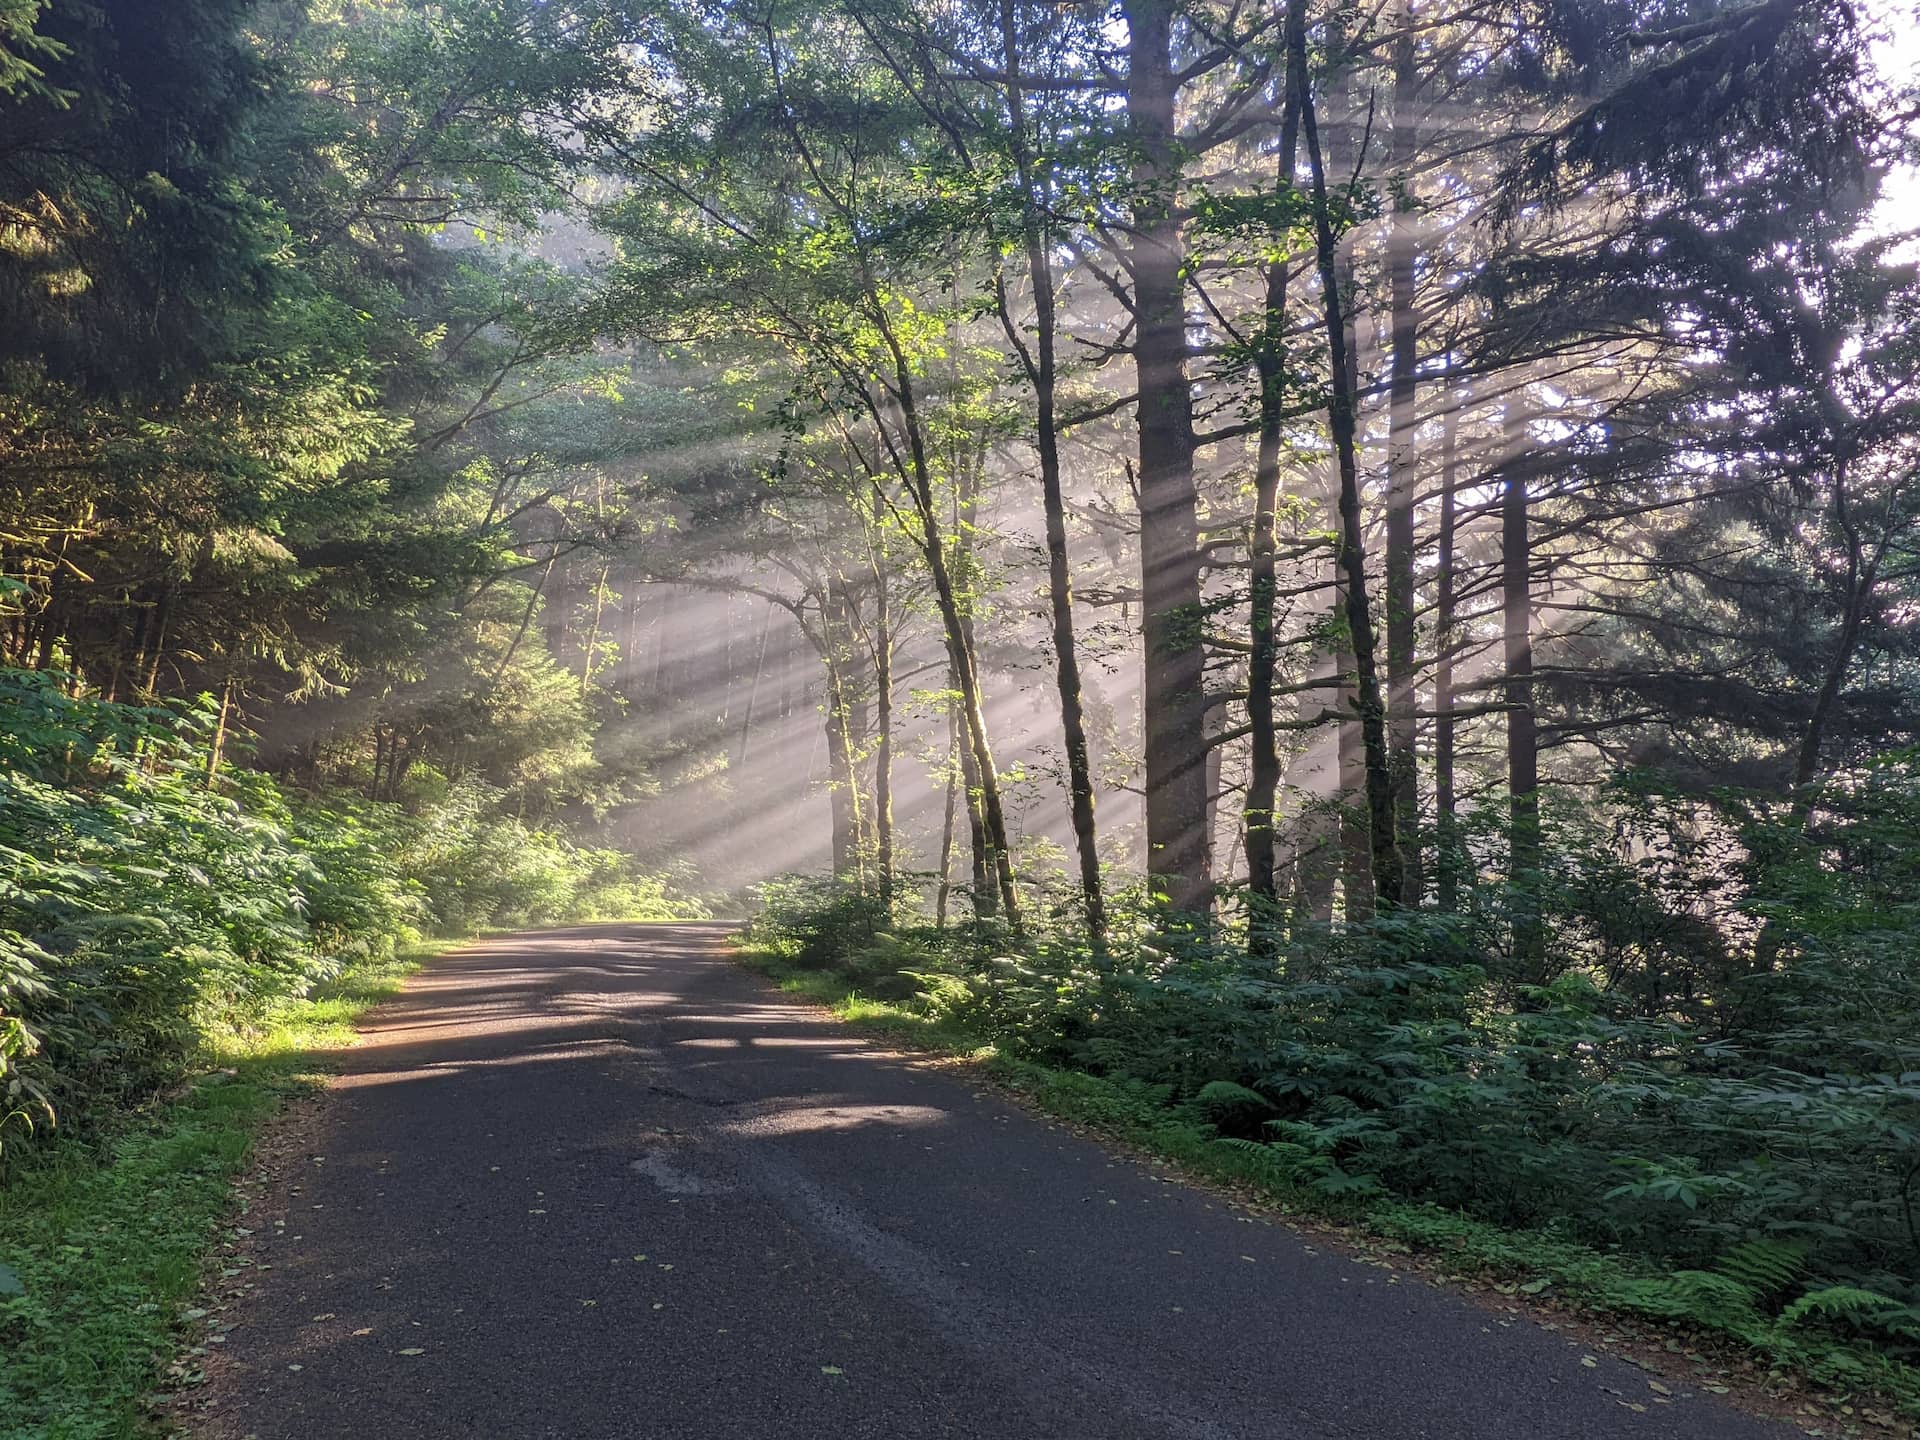 Beams of sunlight passing through trees onto an empty road